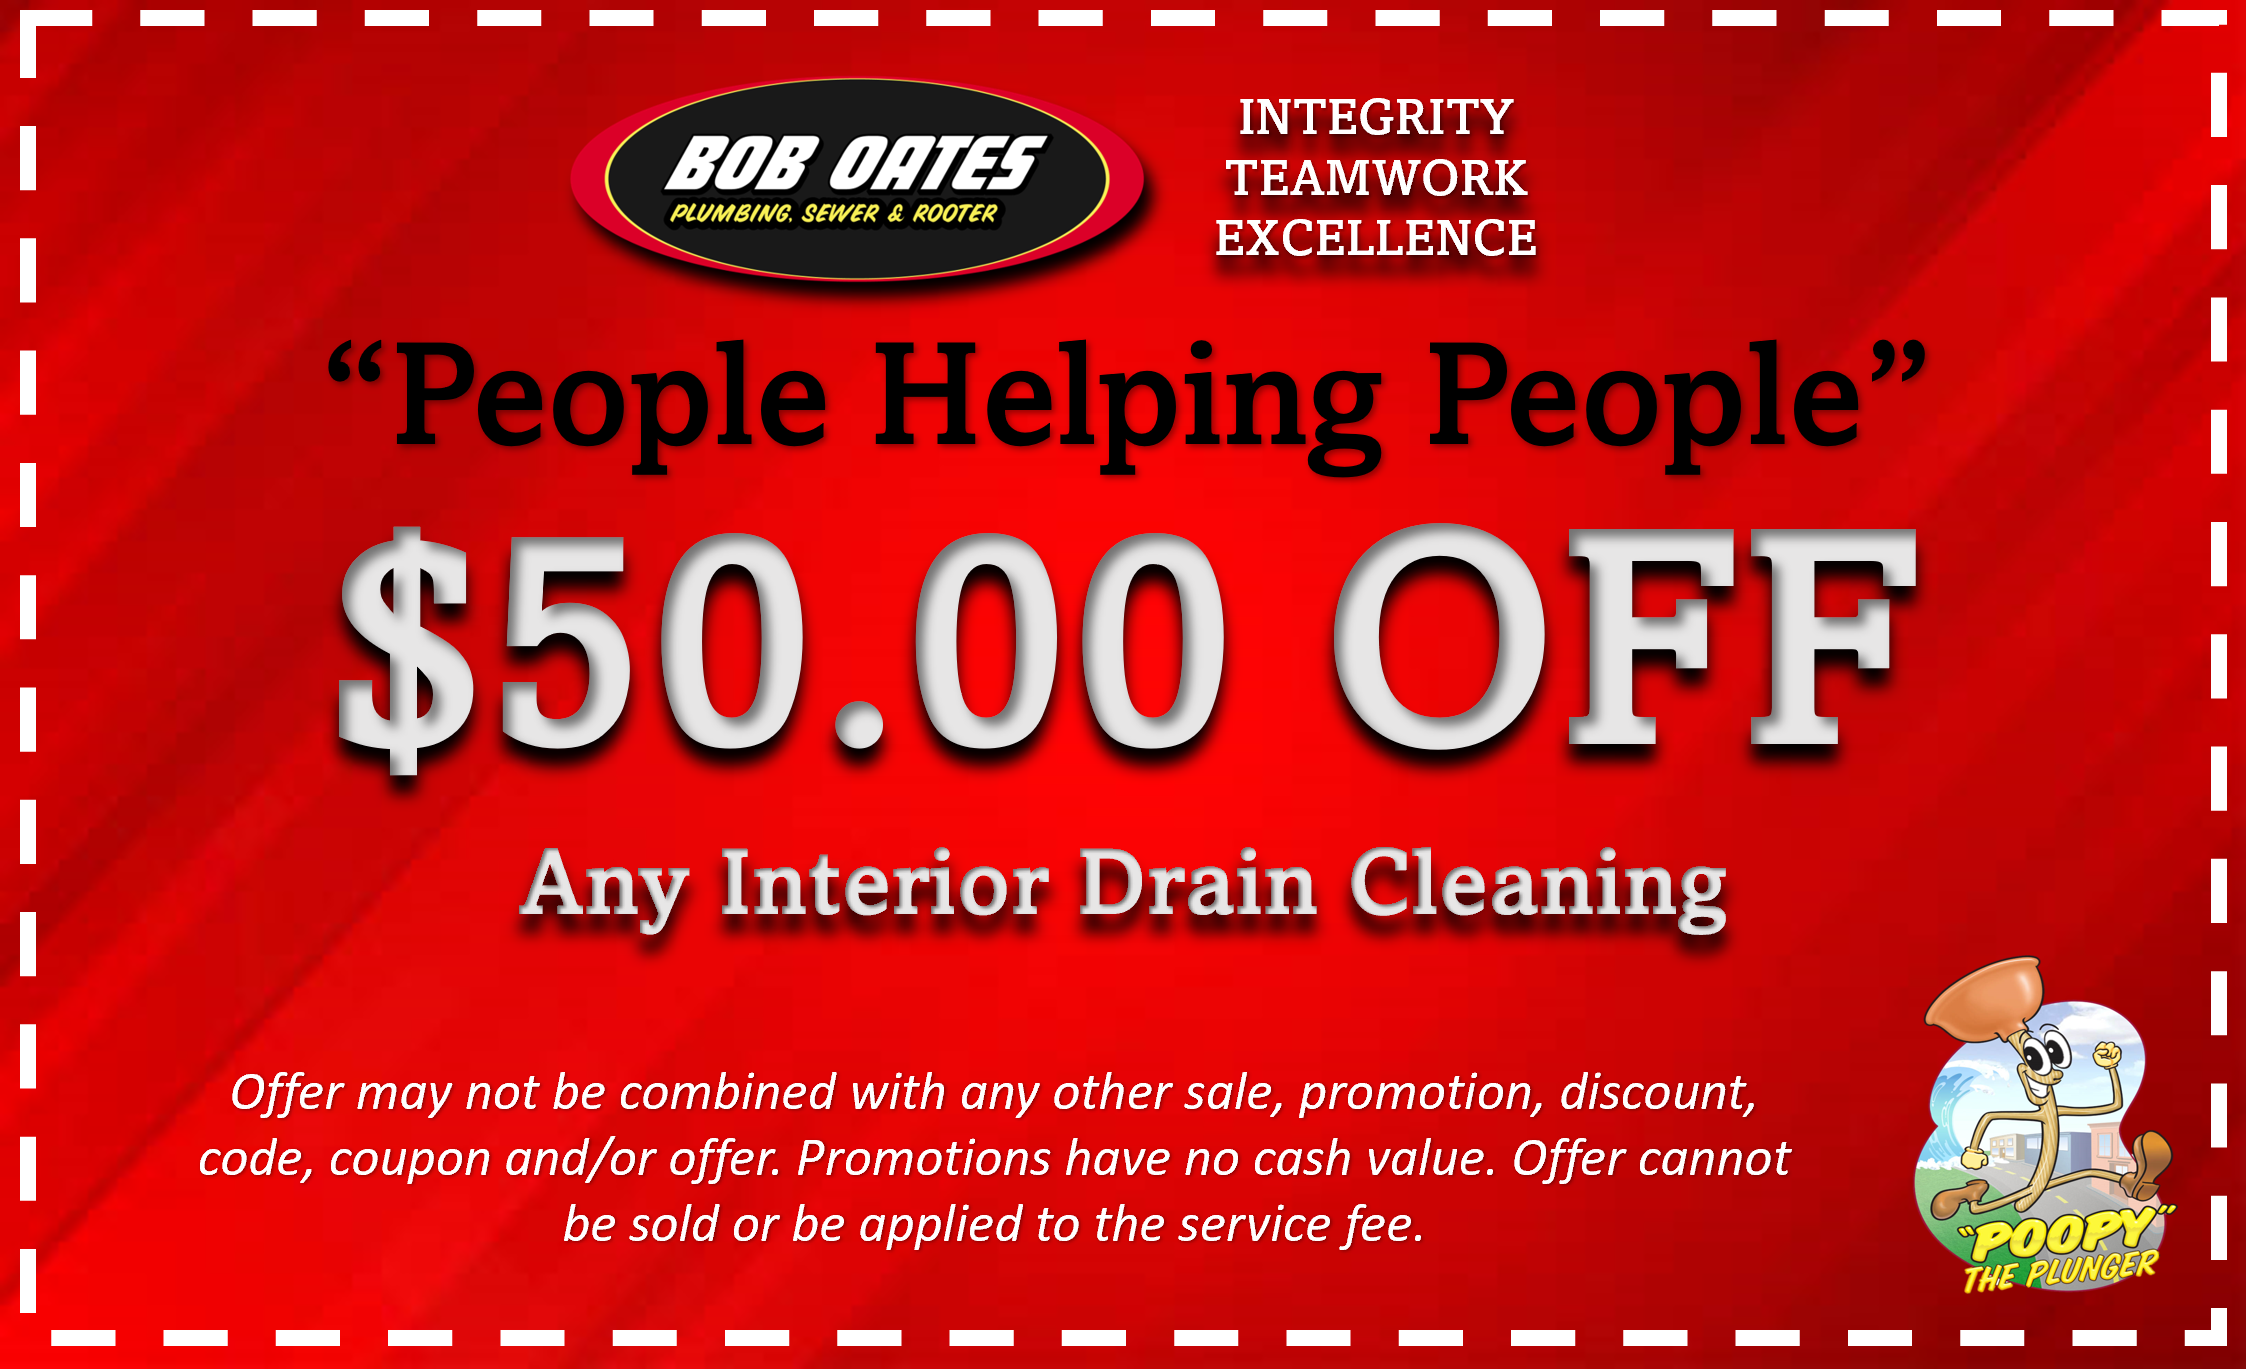 Coupon for $50 off any interior drain cleaning